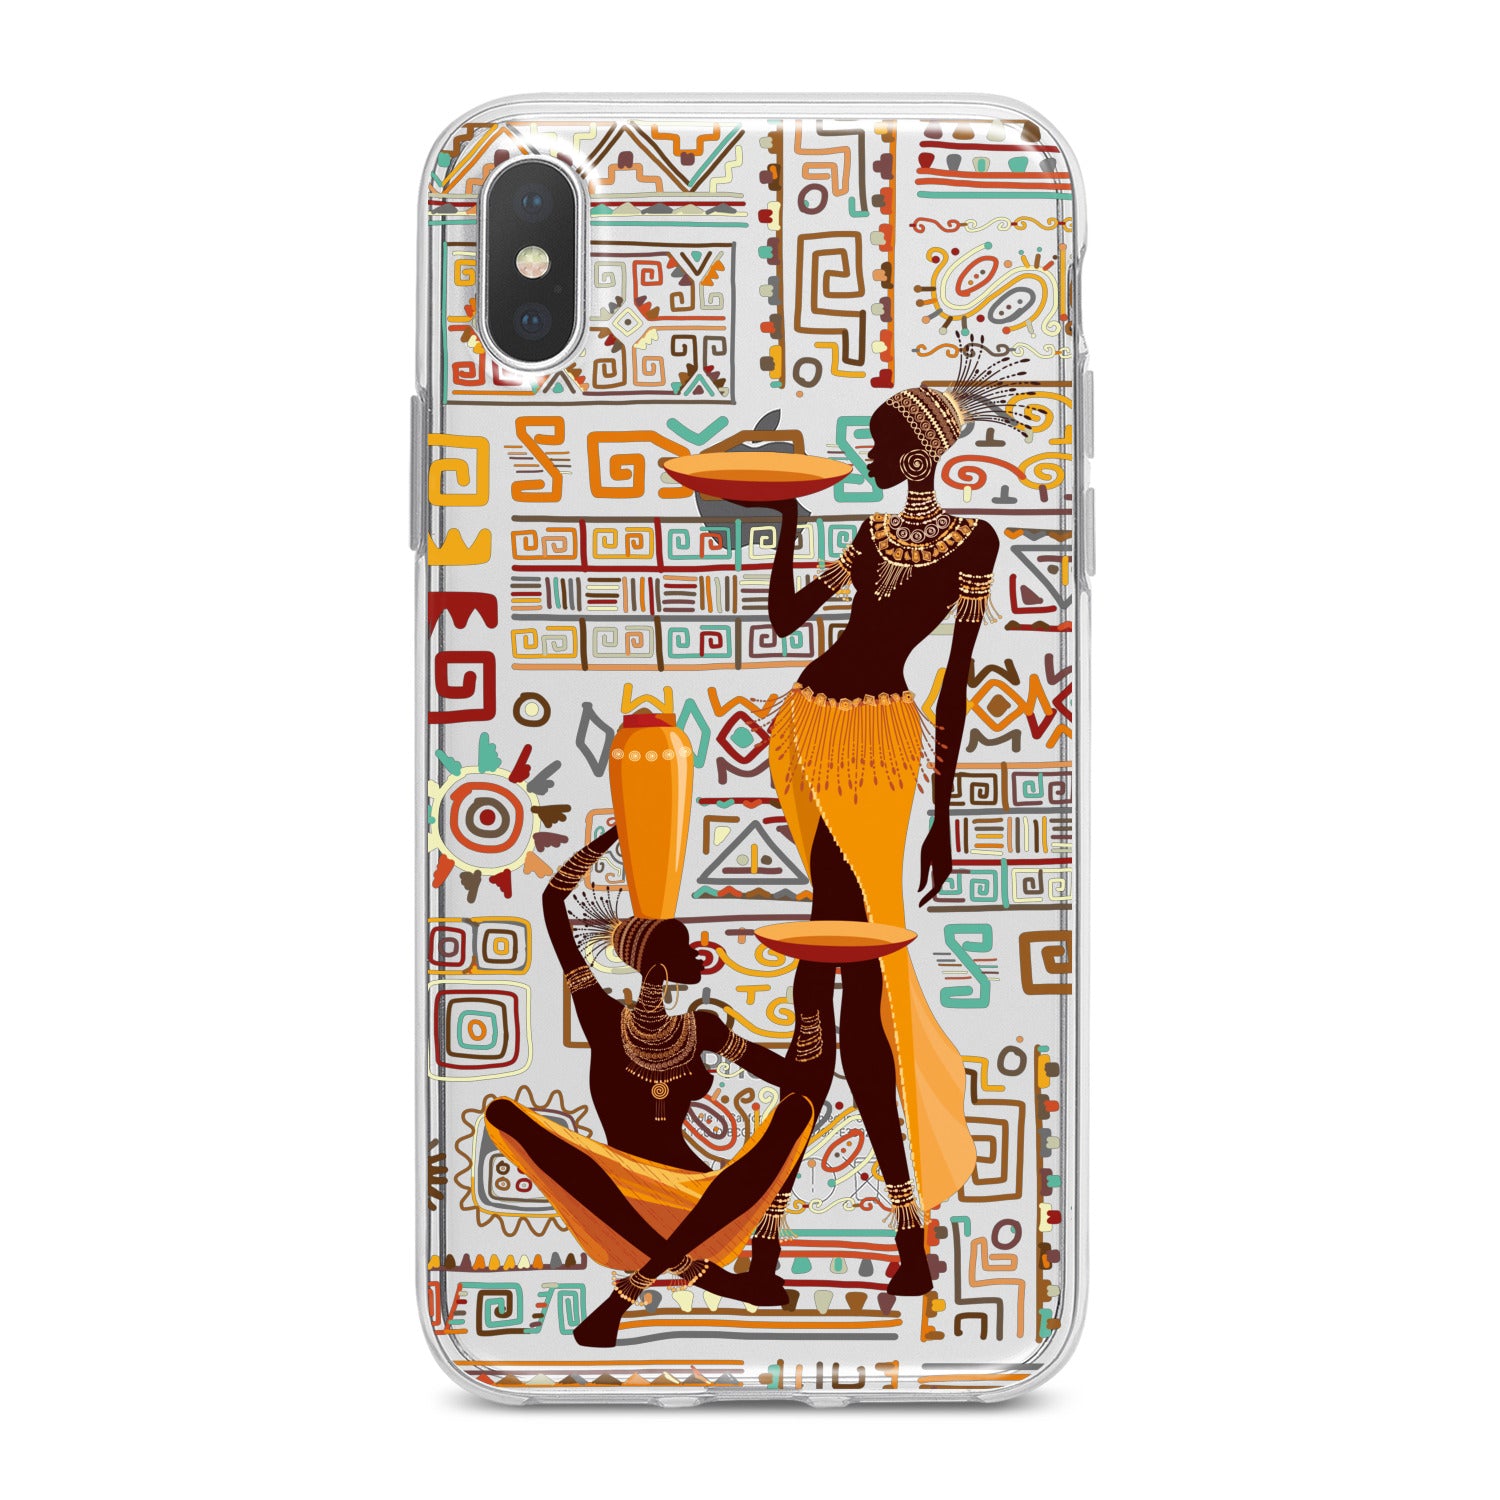 Lex Altern African Tribal Female Phone Case for your iPhone & Android phone.